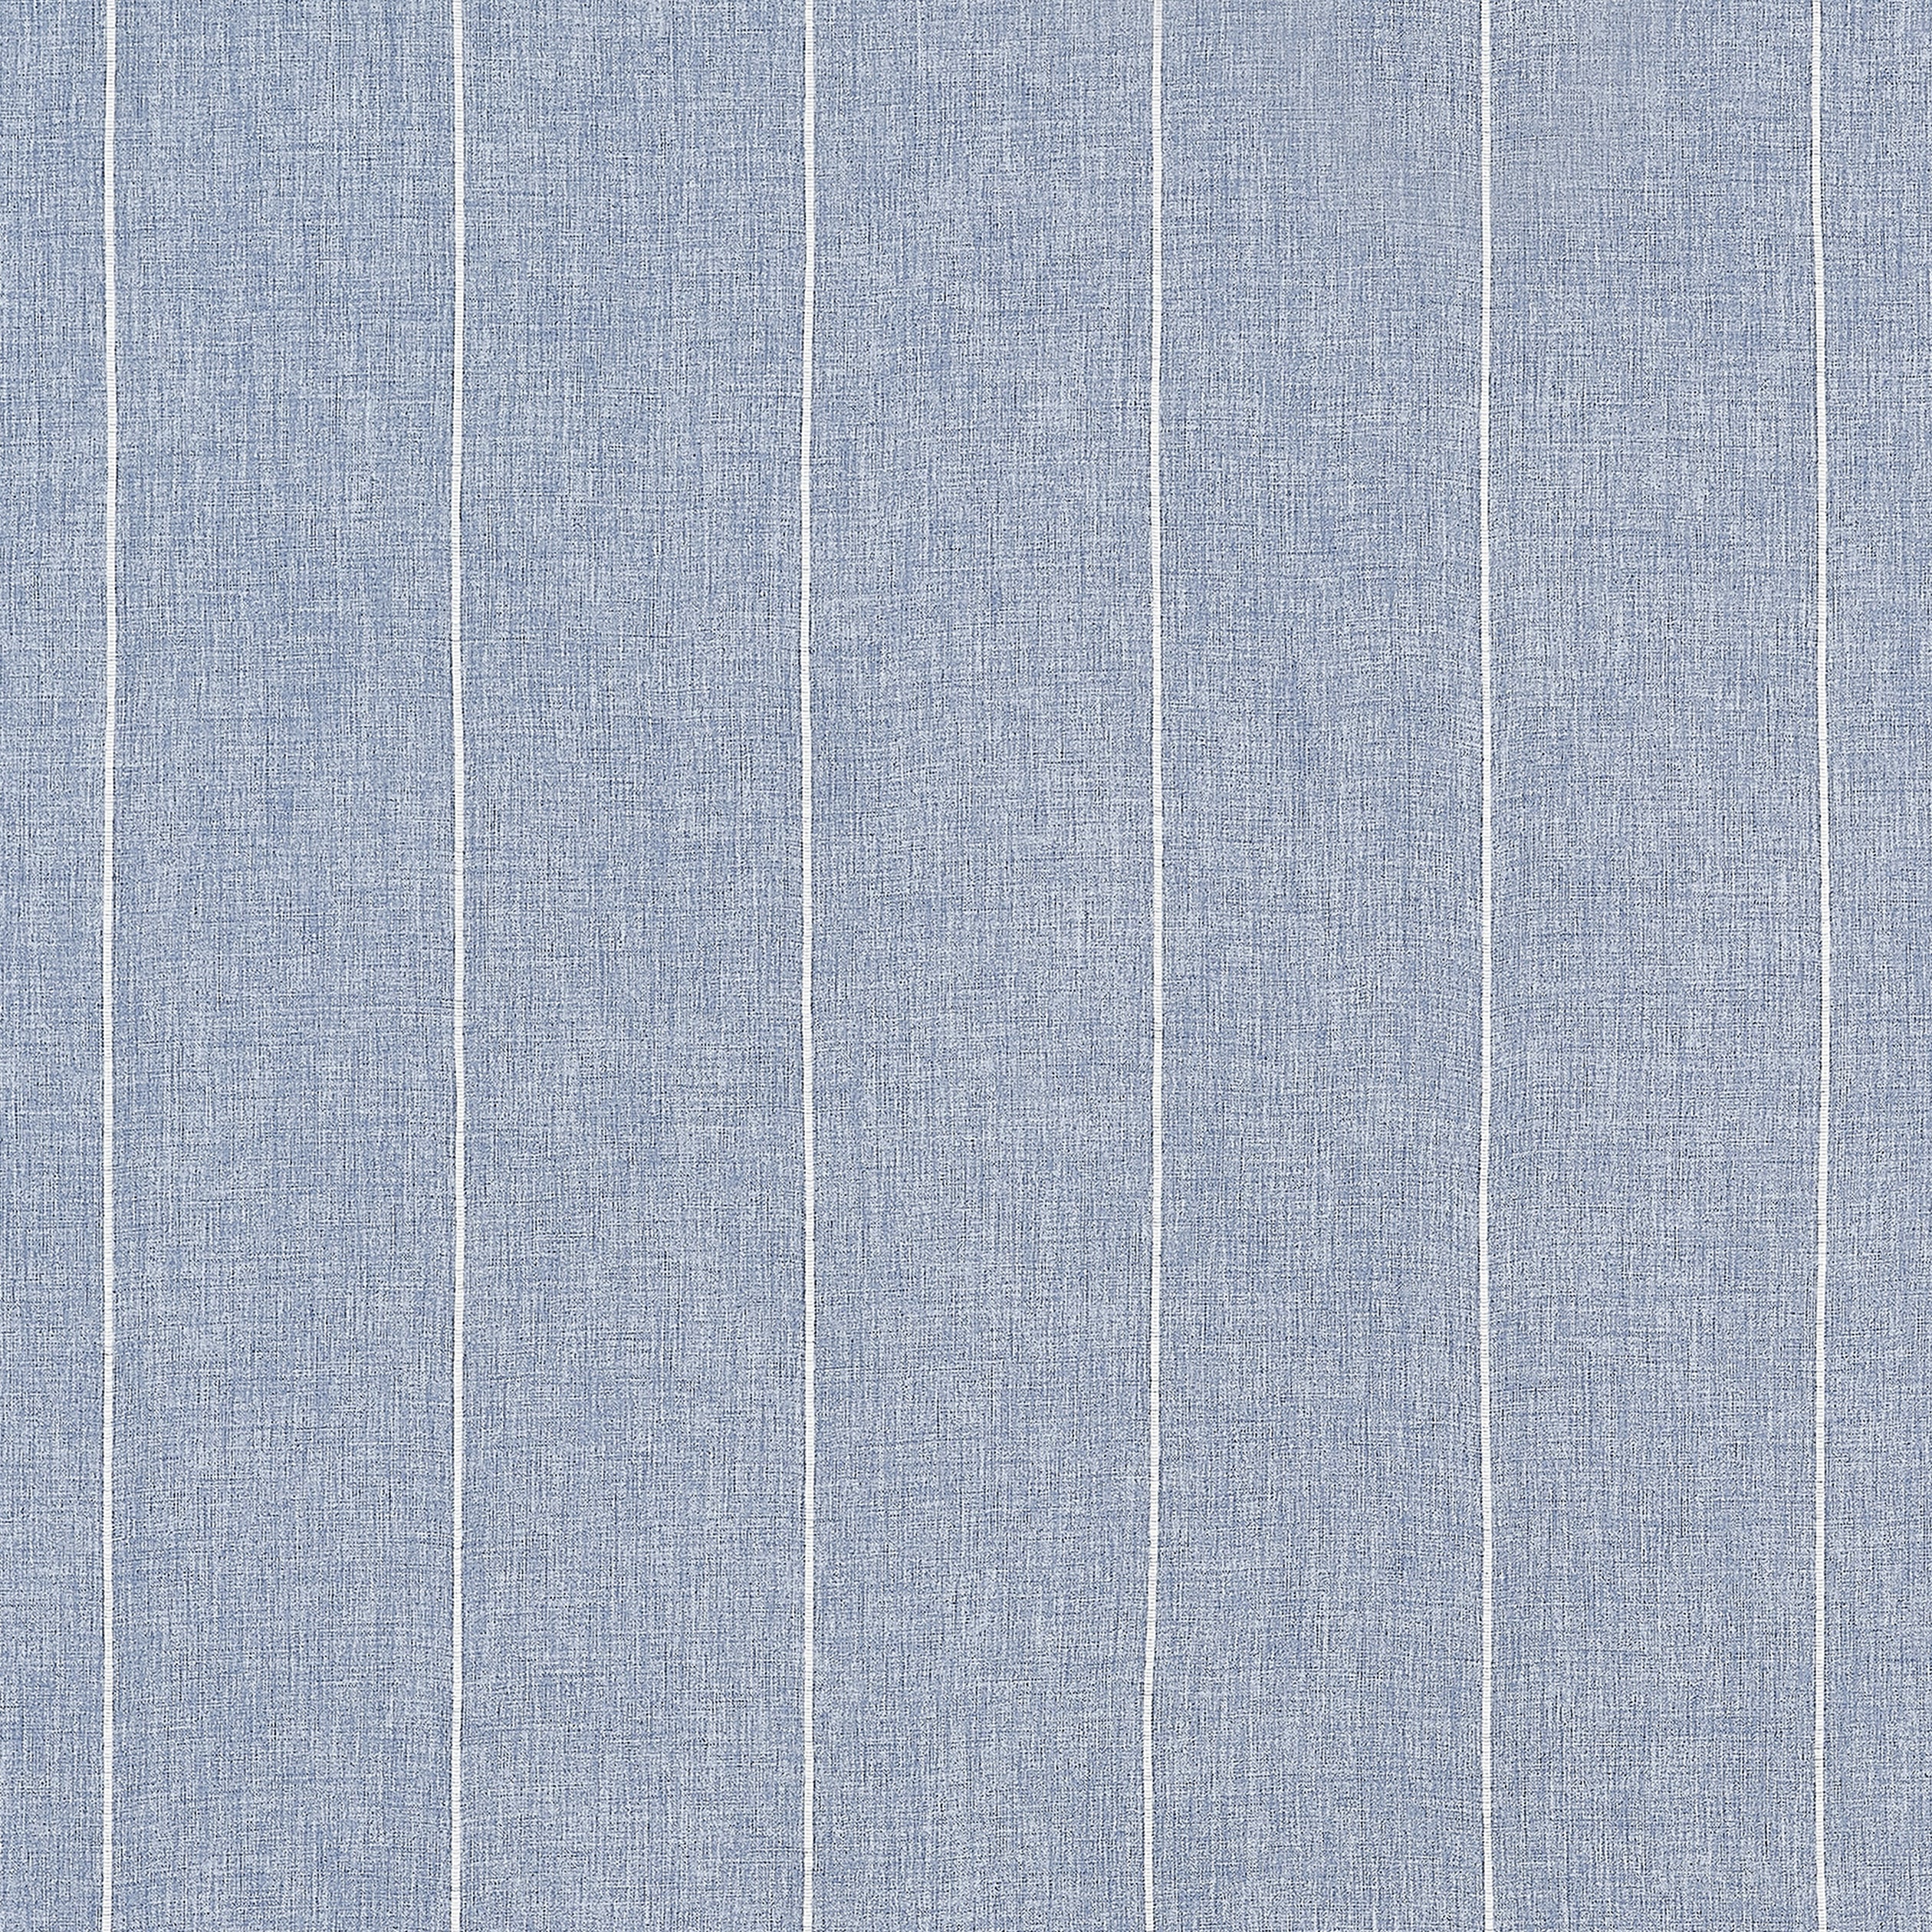 Crestline fabric in oxford blue color - pattern number FWW81740 - by Thibaut in the Locale Wide Width collection